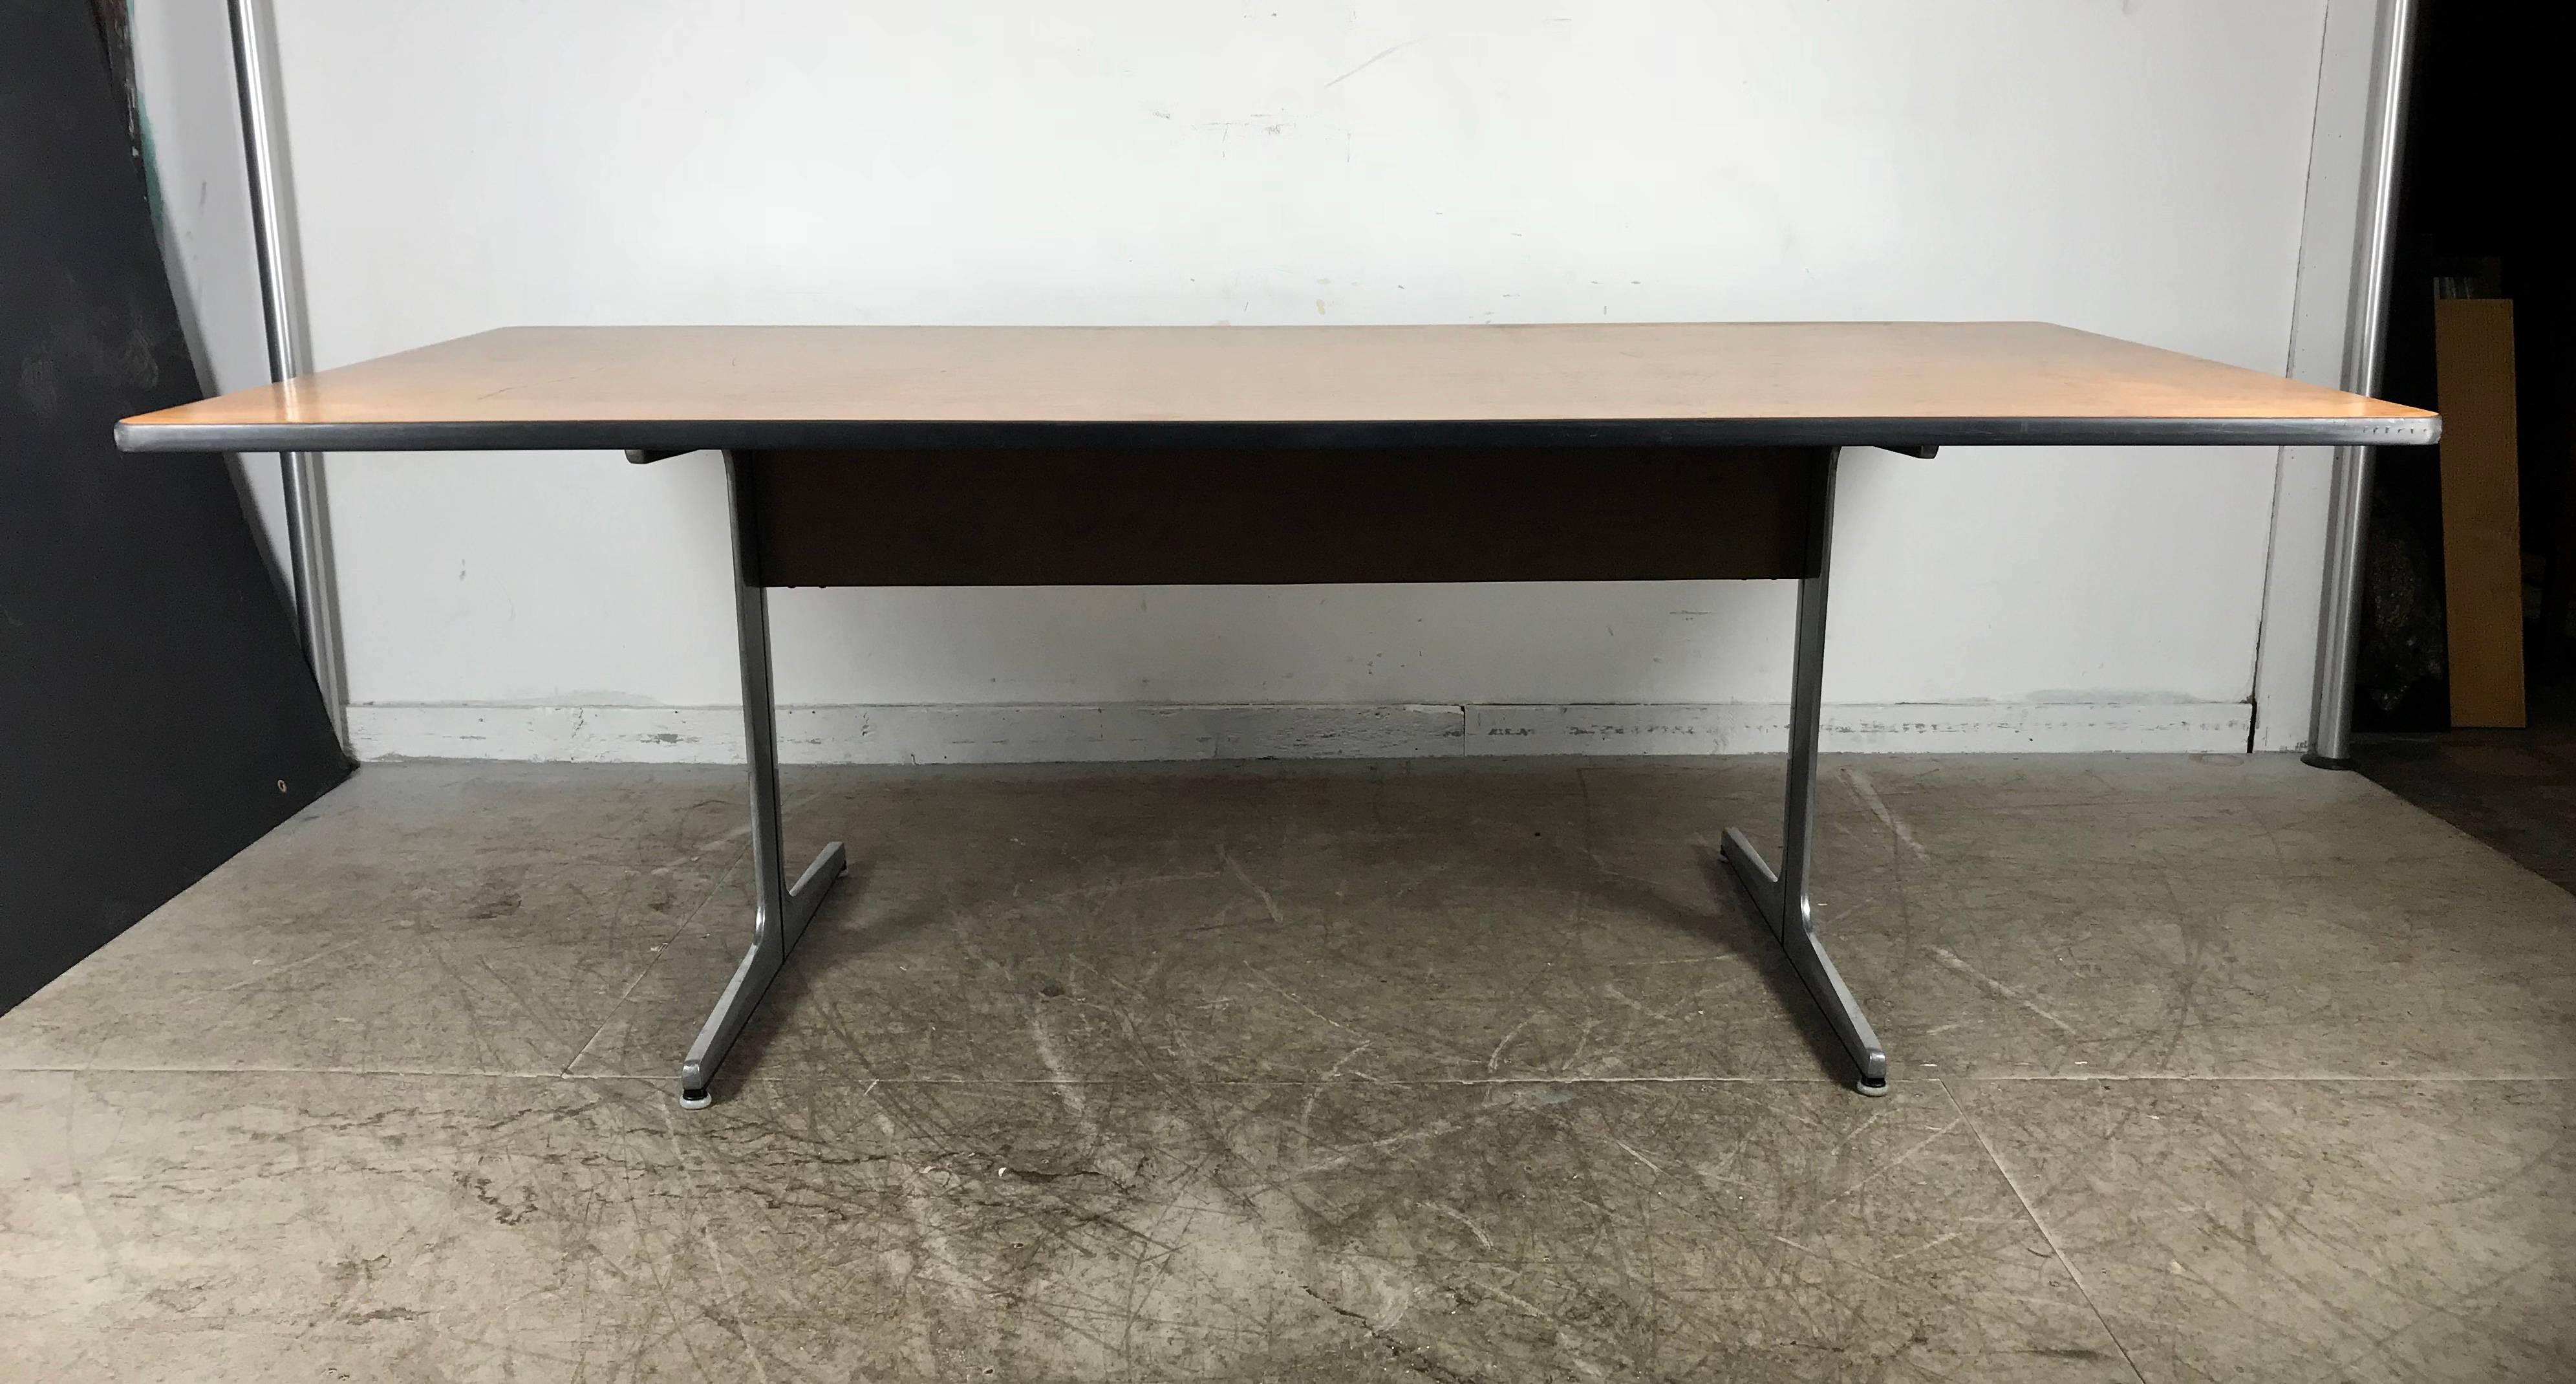 Rarely seen modernist action office desk or conference table by George Nelson for Herman Miller. Purchased from prominent Buffalo NY architect. Beautiful figured walnut wood top minor scratches. Original cast aluminum base. Hand delivery avail to